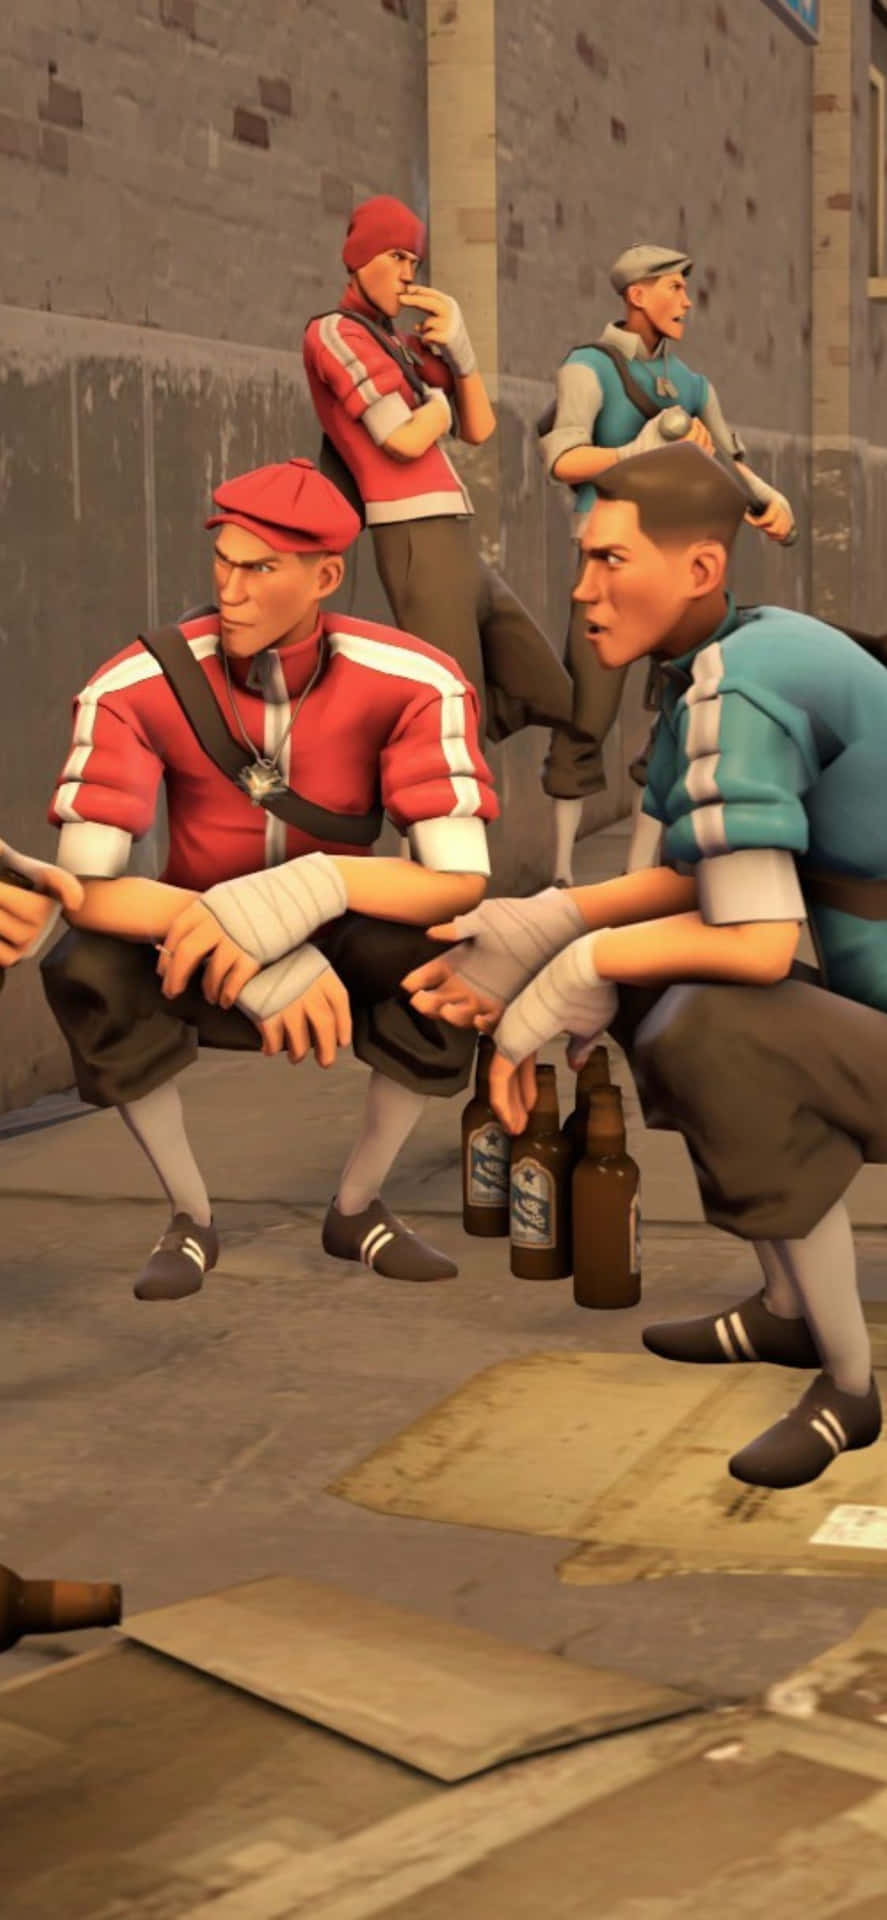 Dive into Team Fortress 2 with the ultimate gaming smartphone